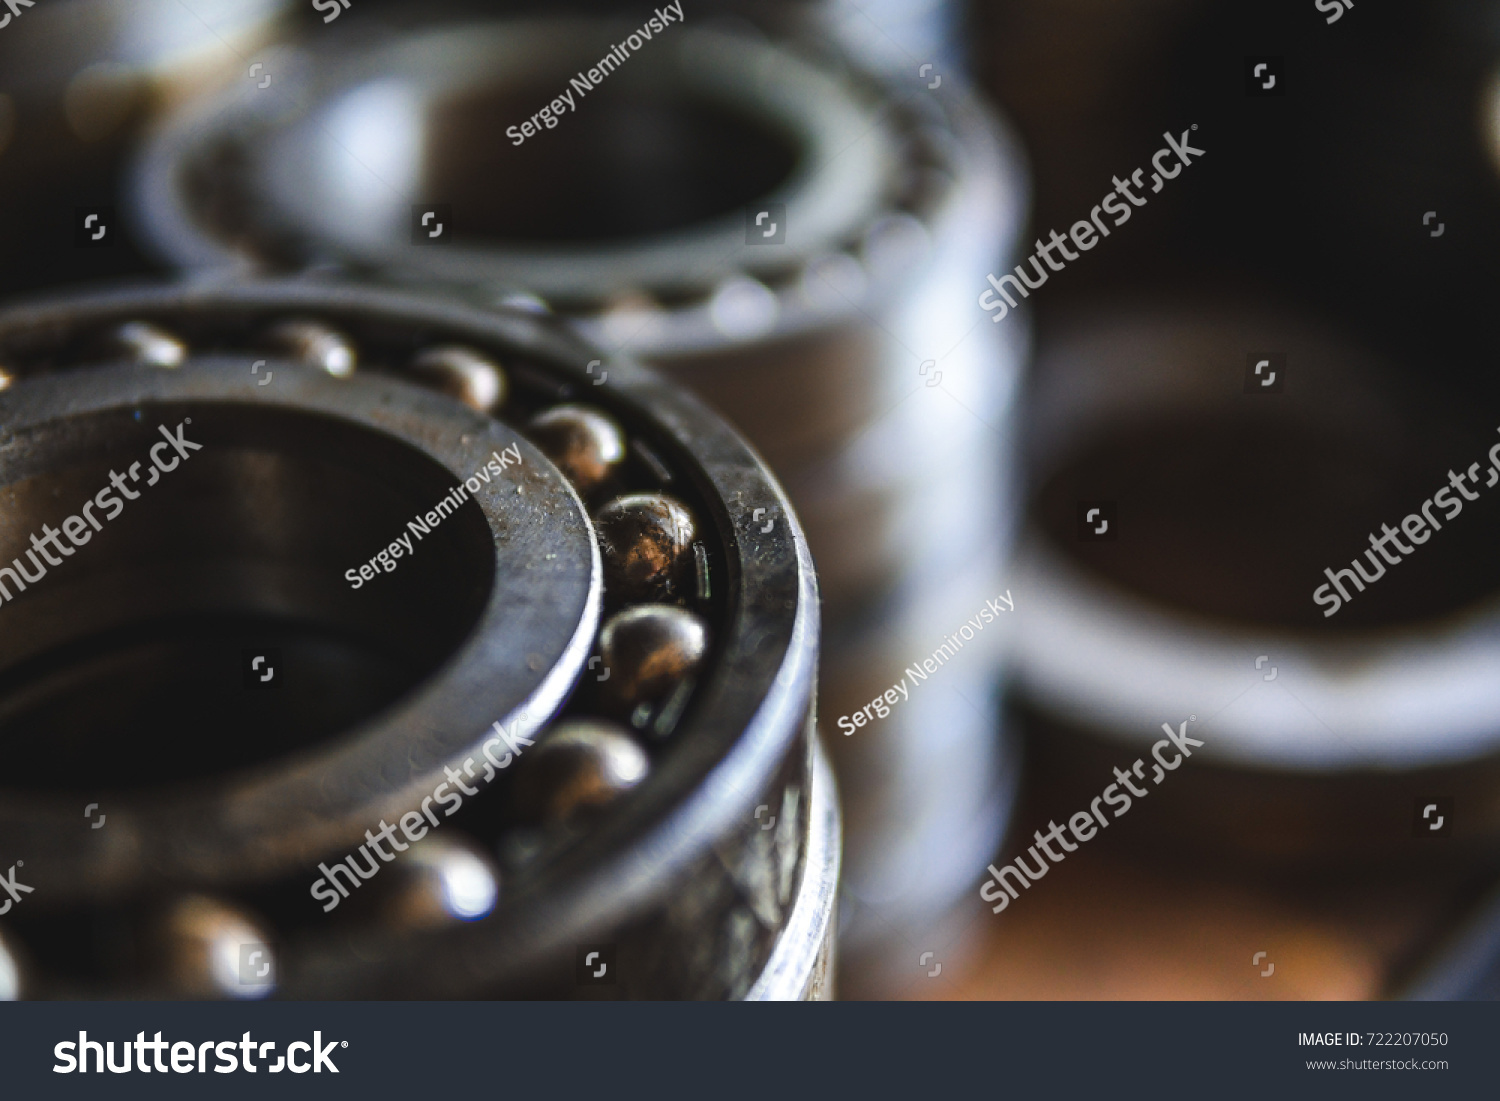 Machinery concept. Set of various gears and ball bearings old and new #722207050